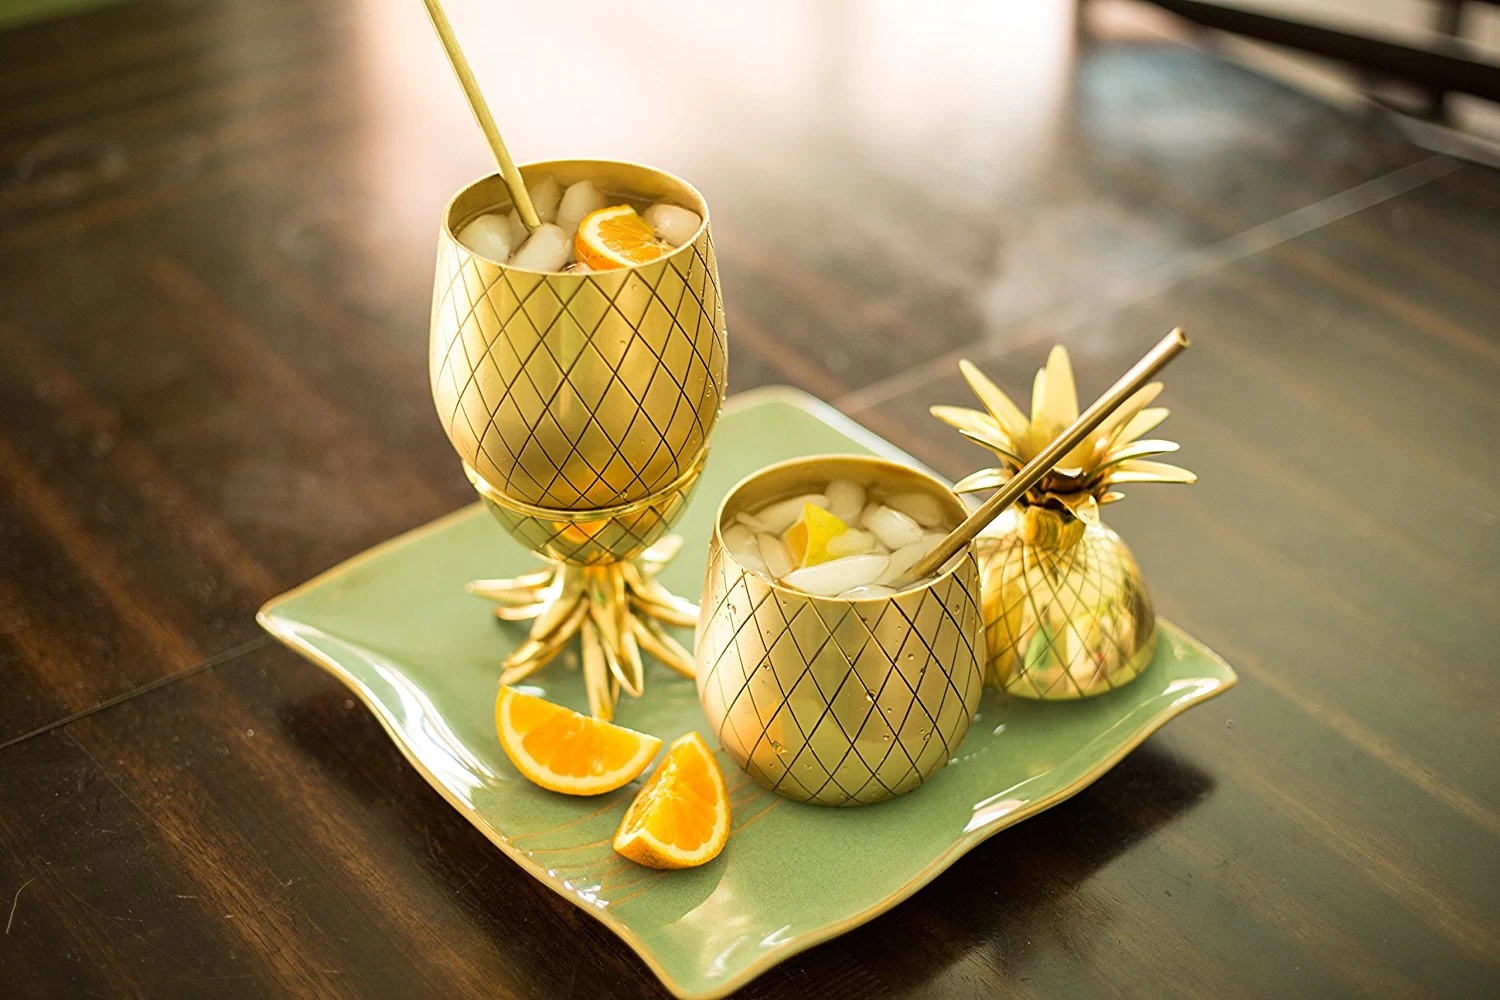 Best stainless steel Gold Plating Pineapple Mug with Straw